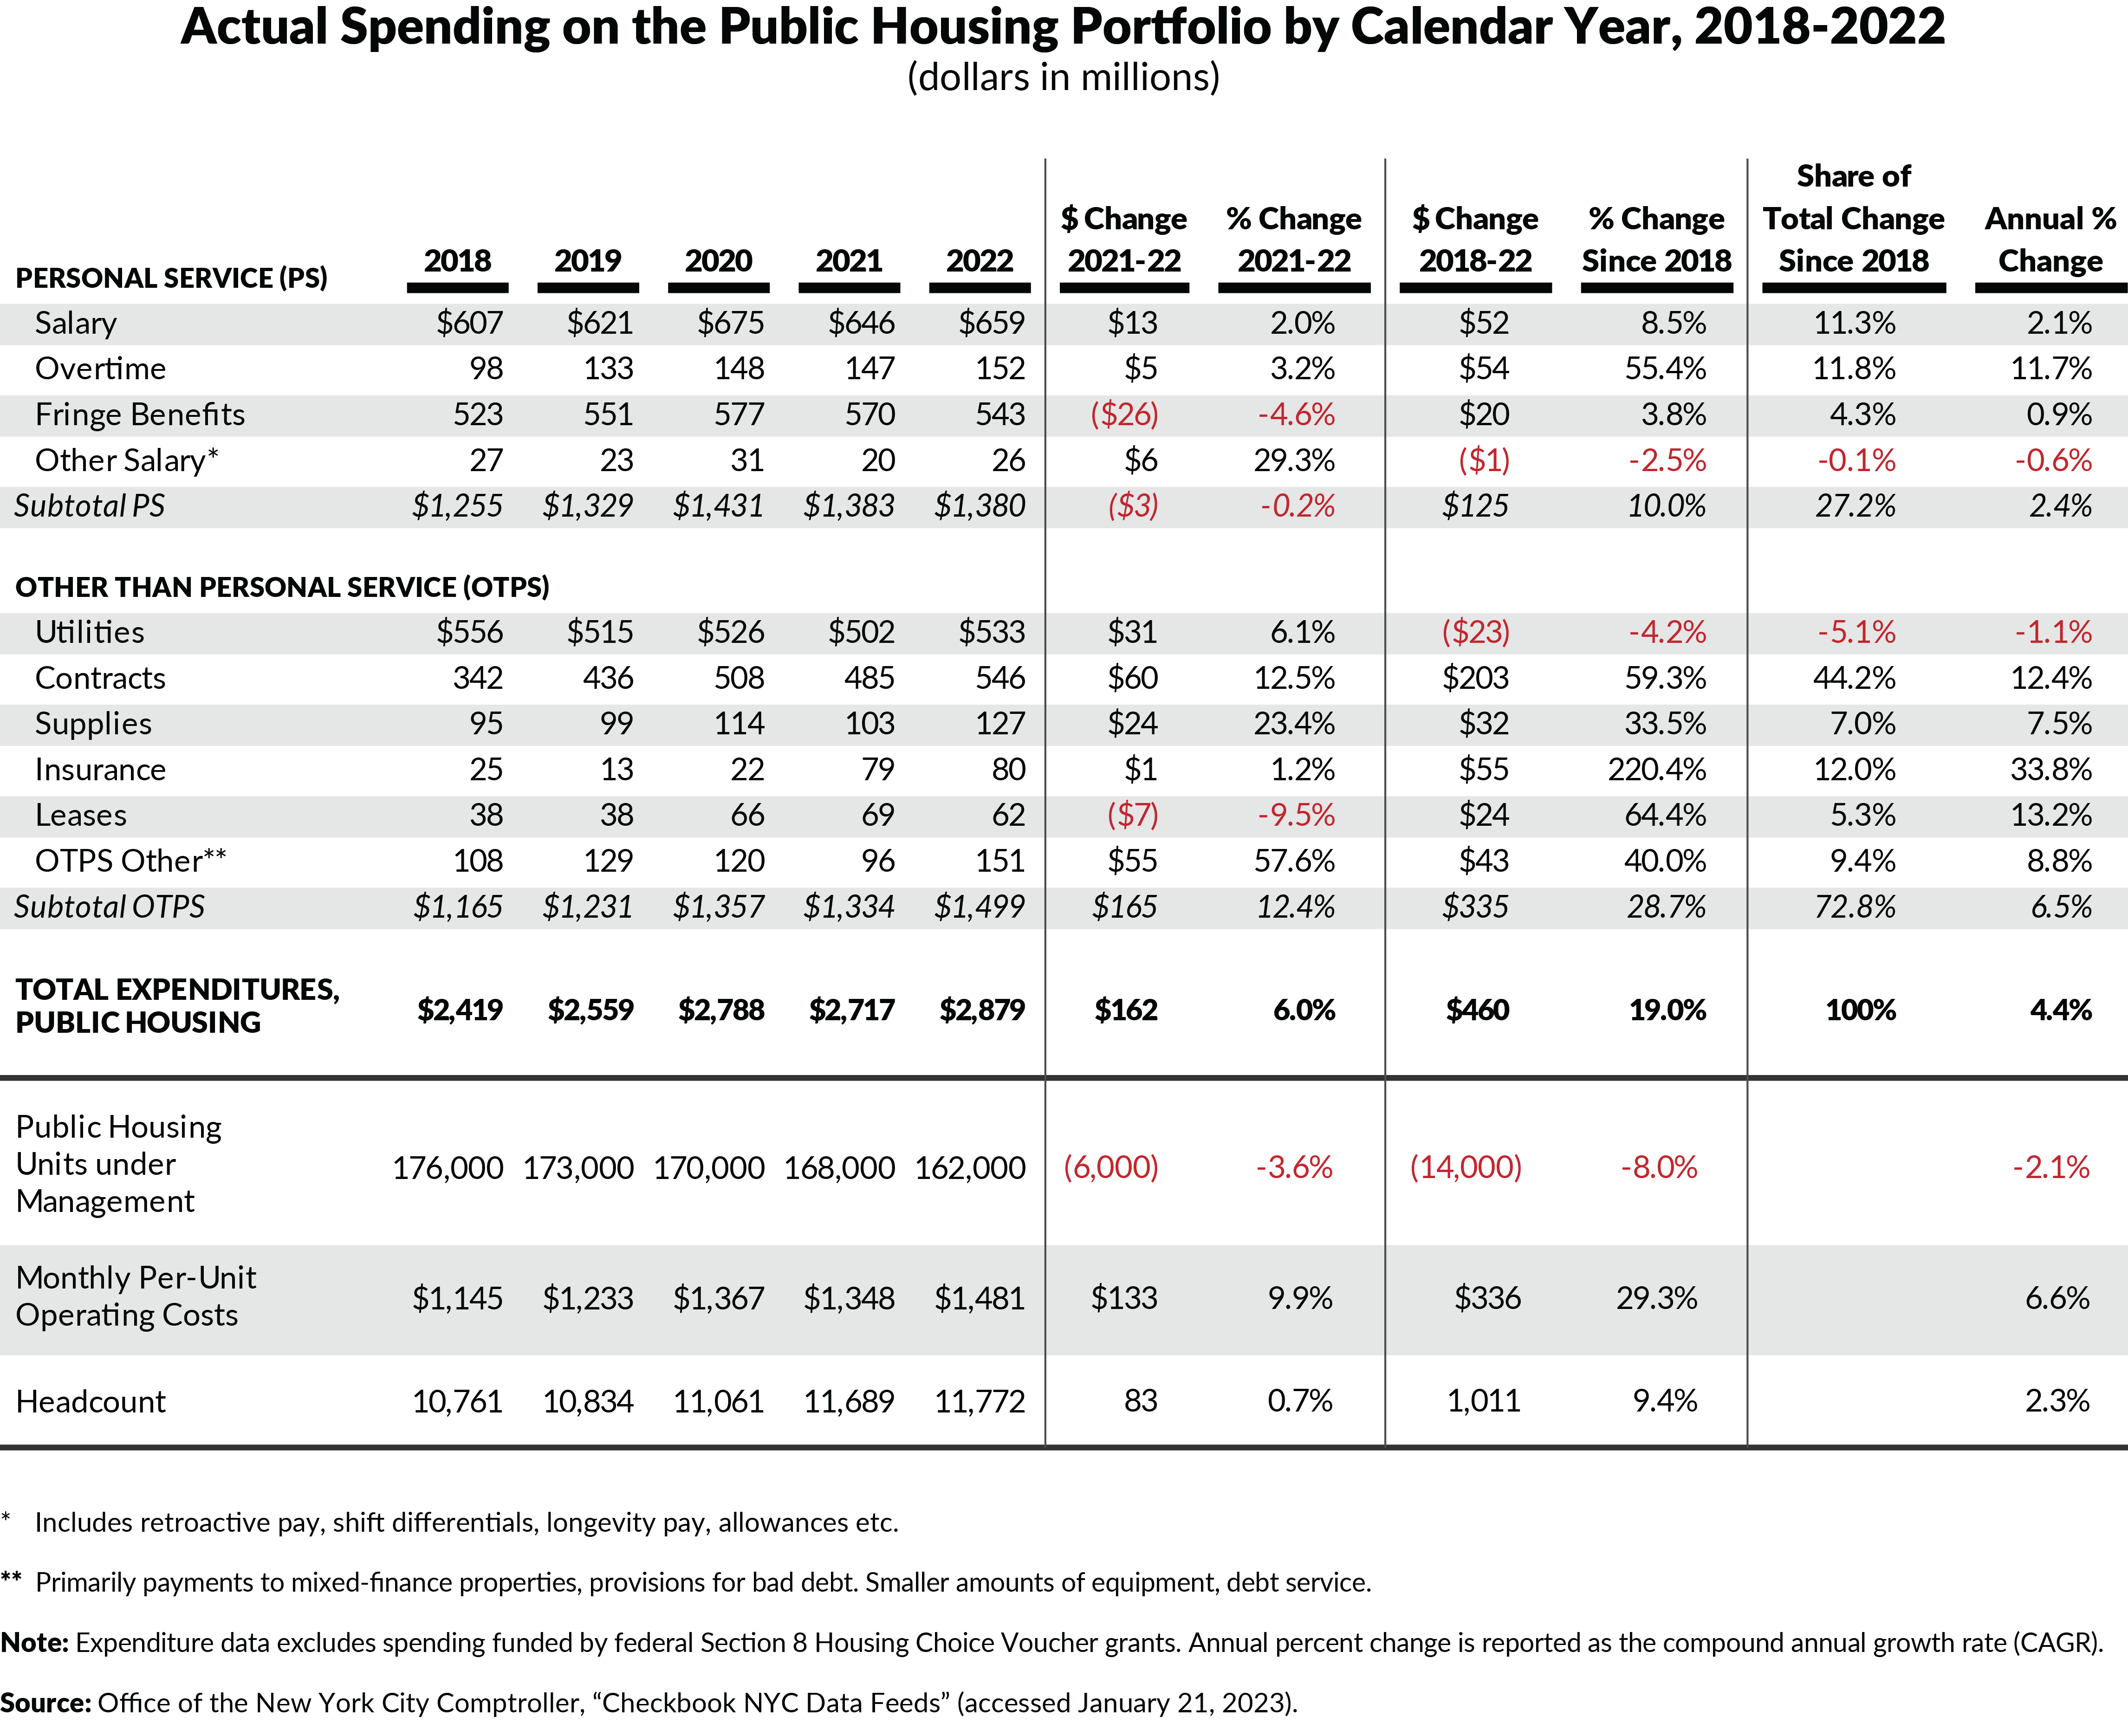 Actual Spending on the Public Housing Portfolio by Calendar Year, 2018-2022(dollars in millions)